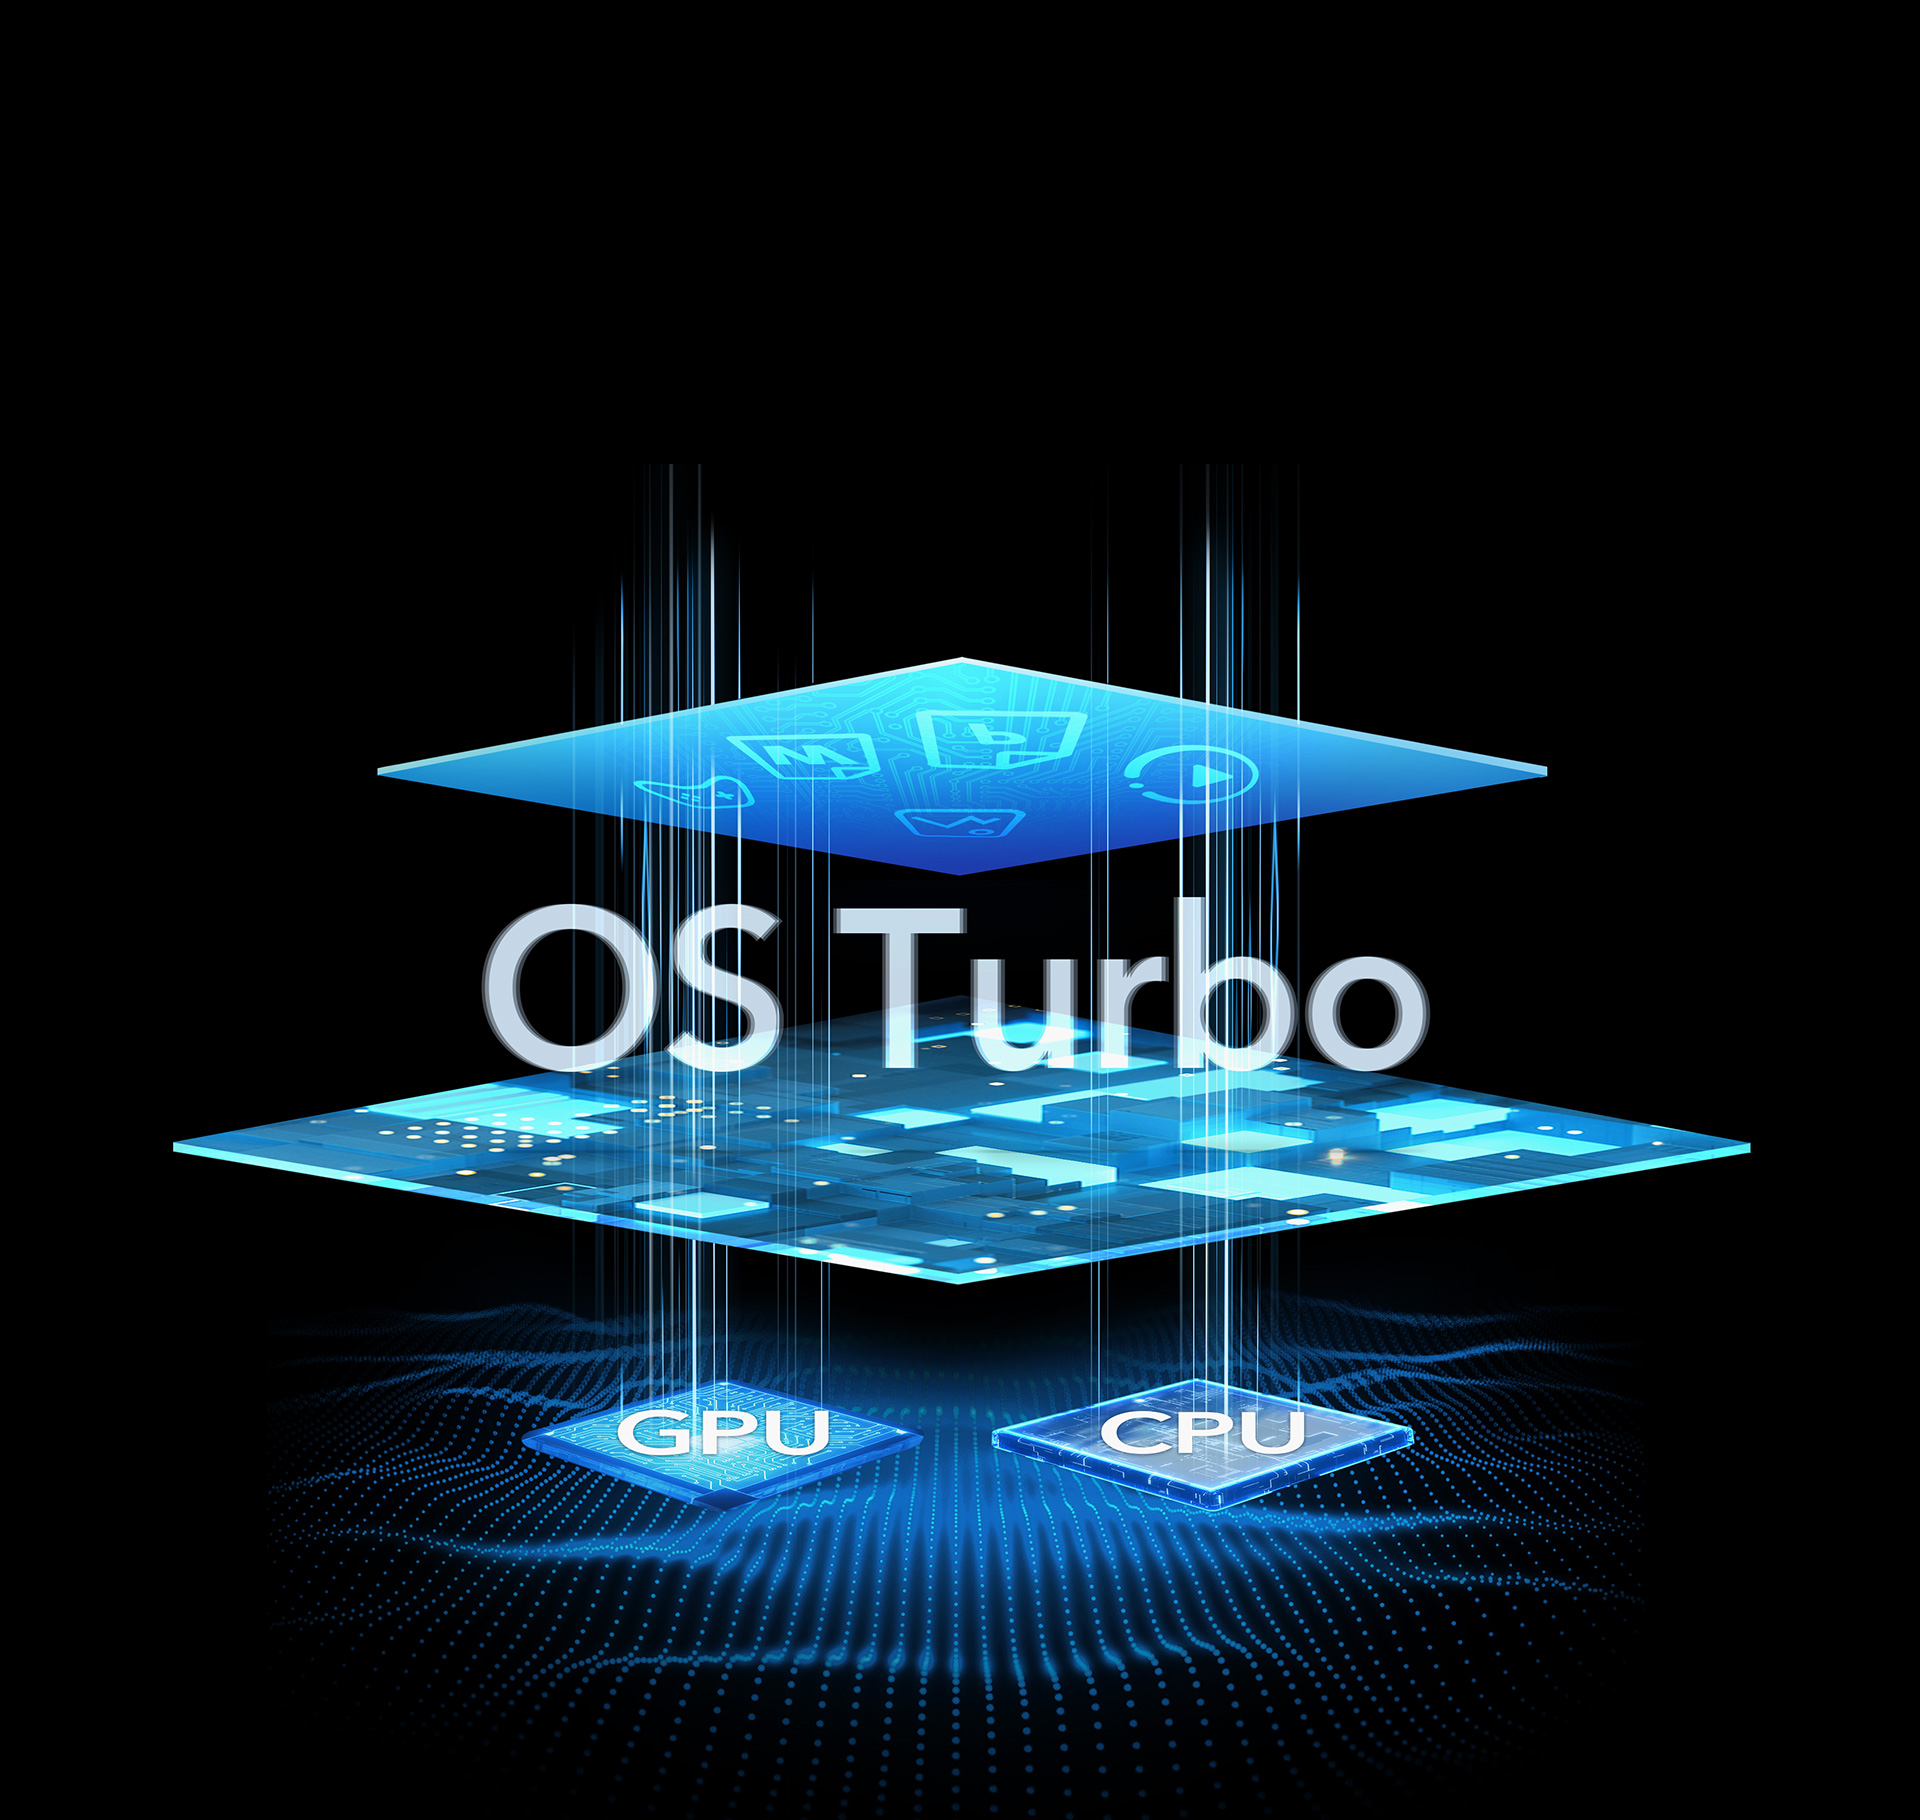 OS Turbo: An excellent balance of battery